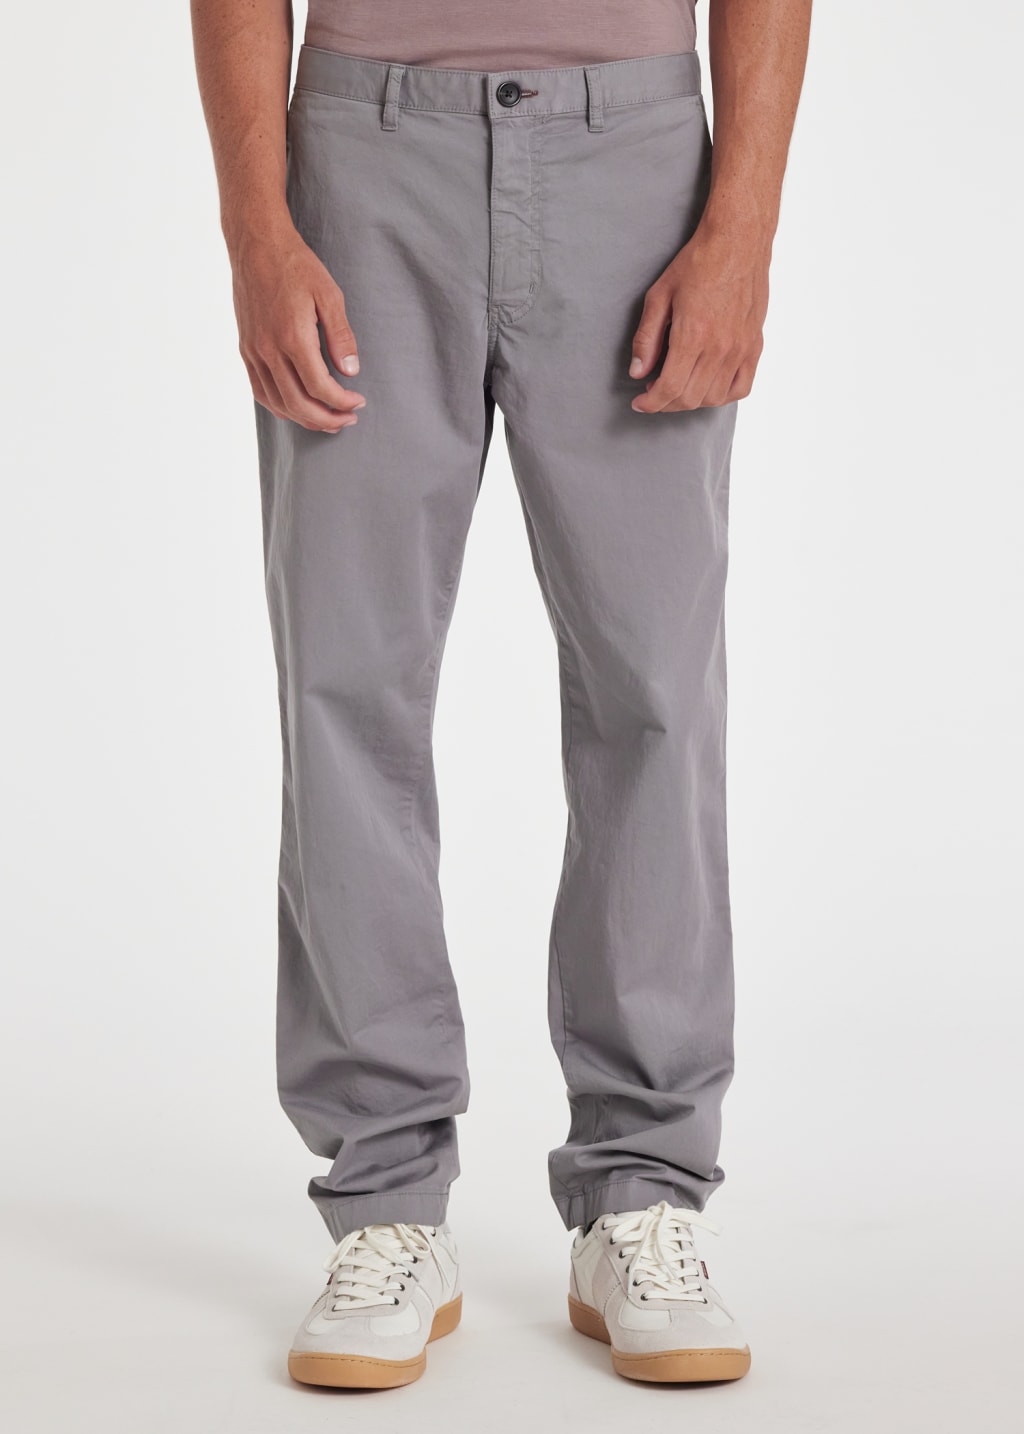 Model View - Tapered-Fit Pale Grey Stretch-Cotton Chinos by Paul Smith